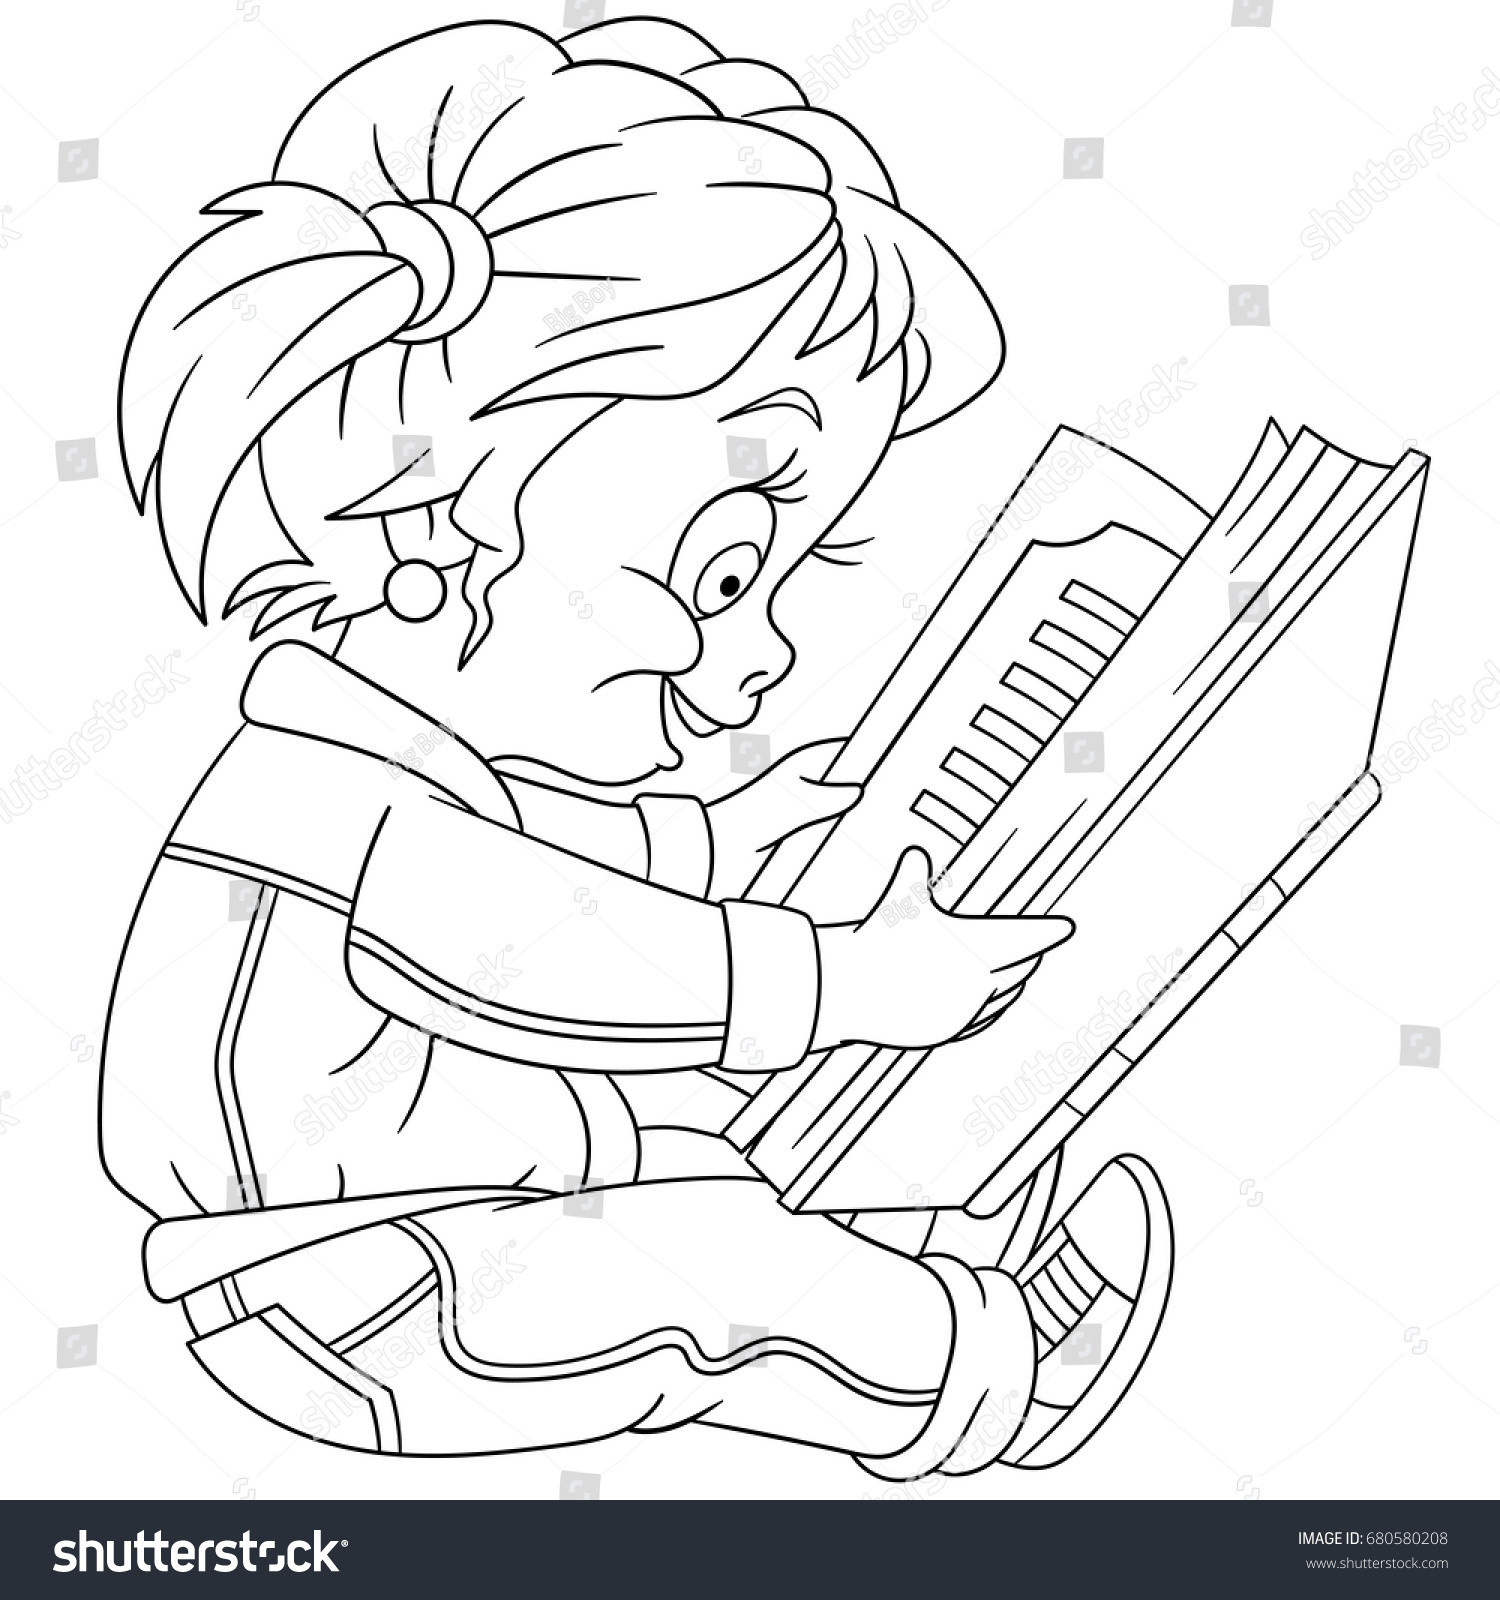 Girl With A Book Coloring Pages
 Coloring Page Preschool Girl Reading Book Stock Vector